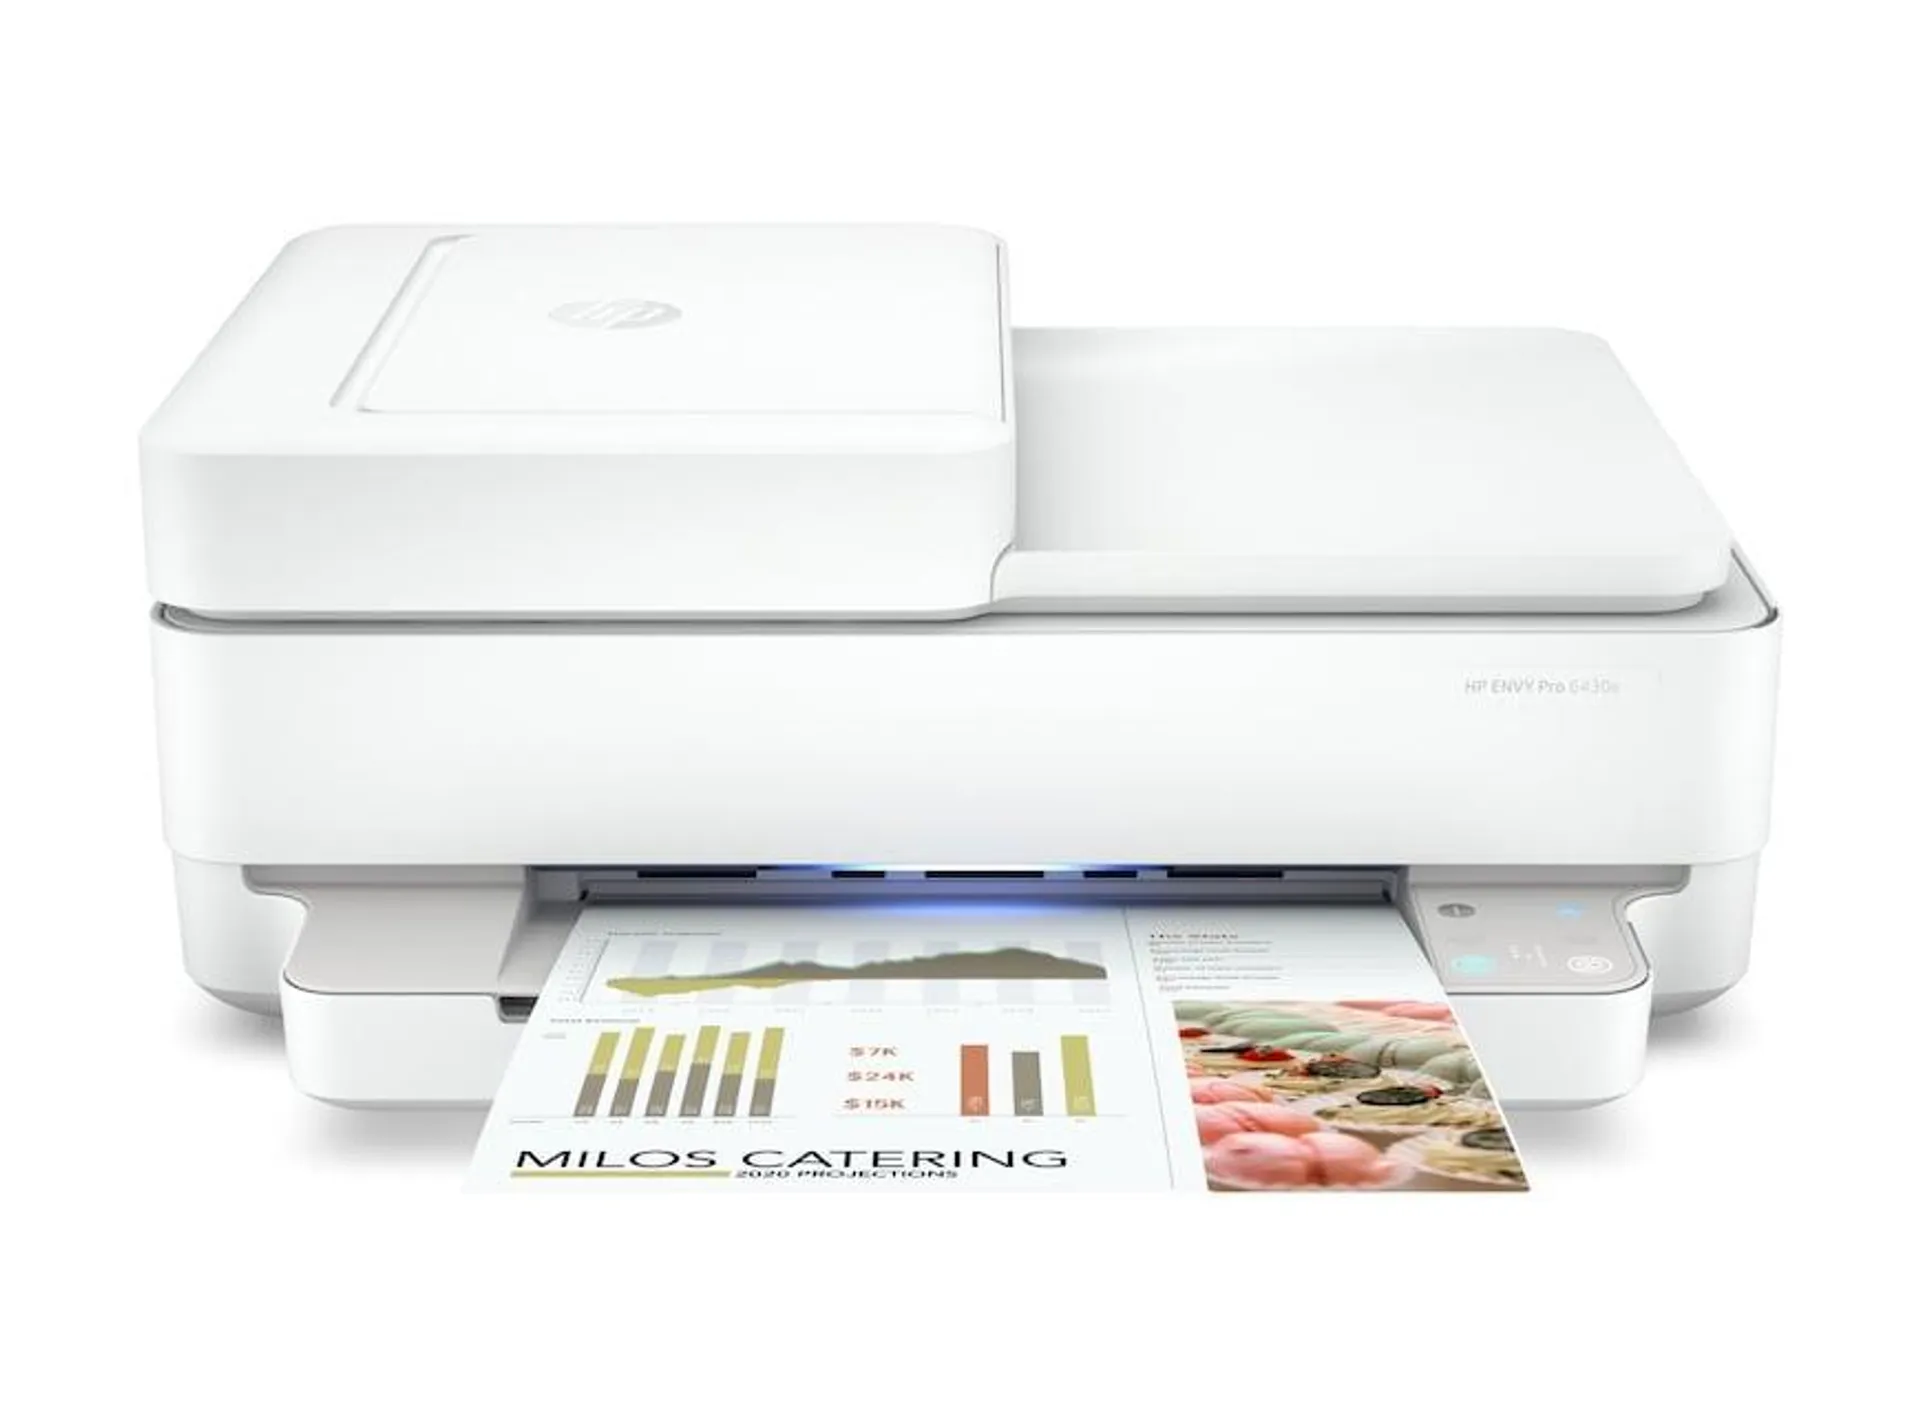 HP ENVY 6430e HP+ enabled All-in-One Wireless Colour Printer with 6 months Instant Ink